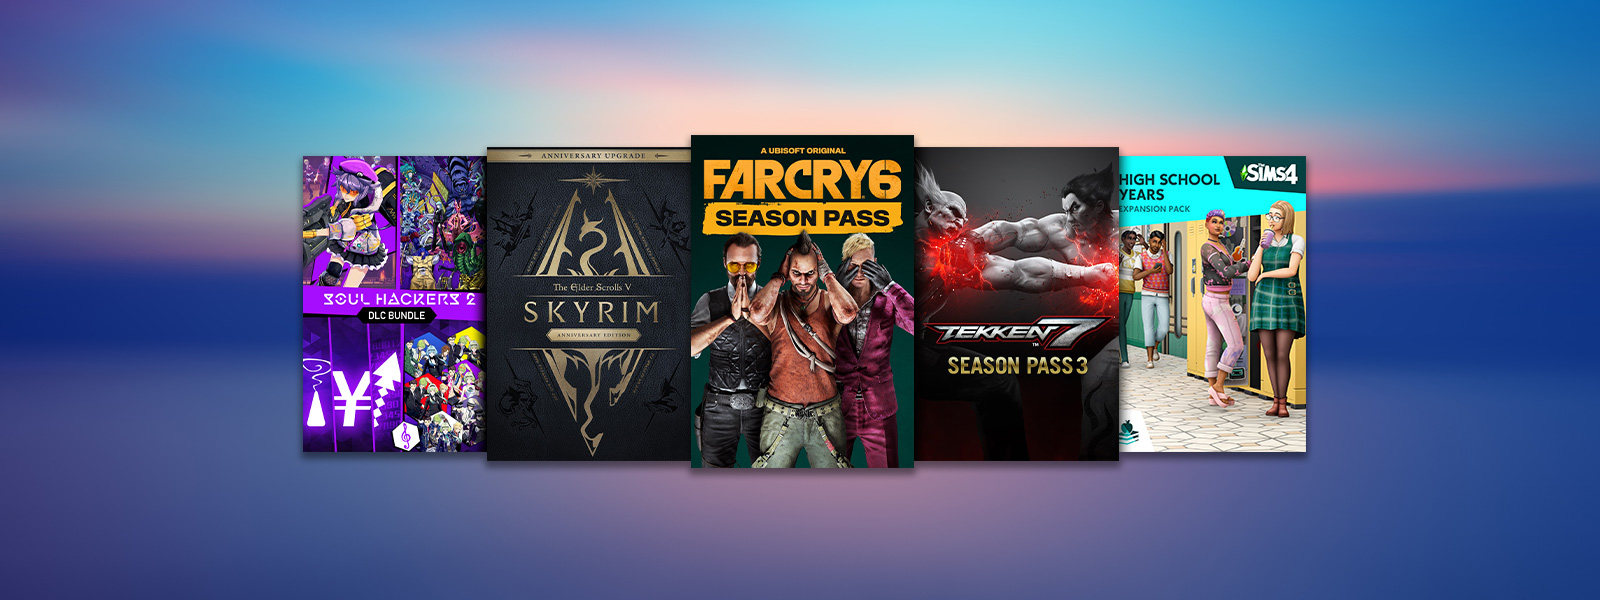 Box art from games that are part of the Tis The Season Add-on Sale, including The Elder Scrolls V: Skyrim Anniversary Edition, Far Cry 6 Season Pass, and TEKKEN 7 - Season Pass 3.